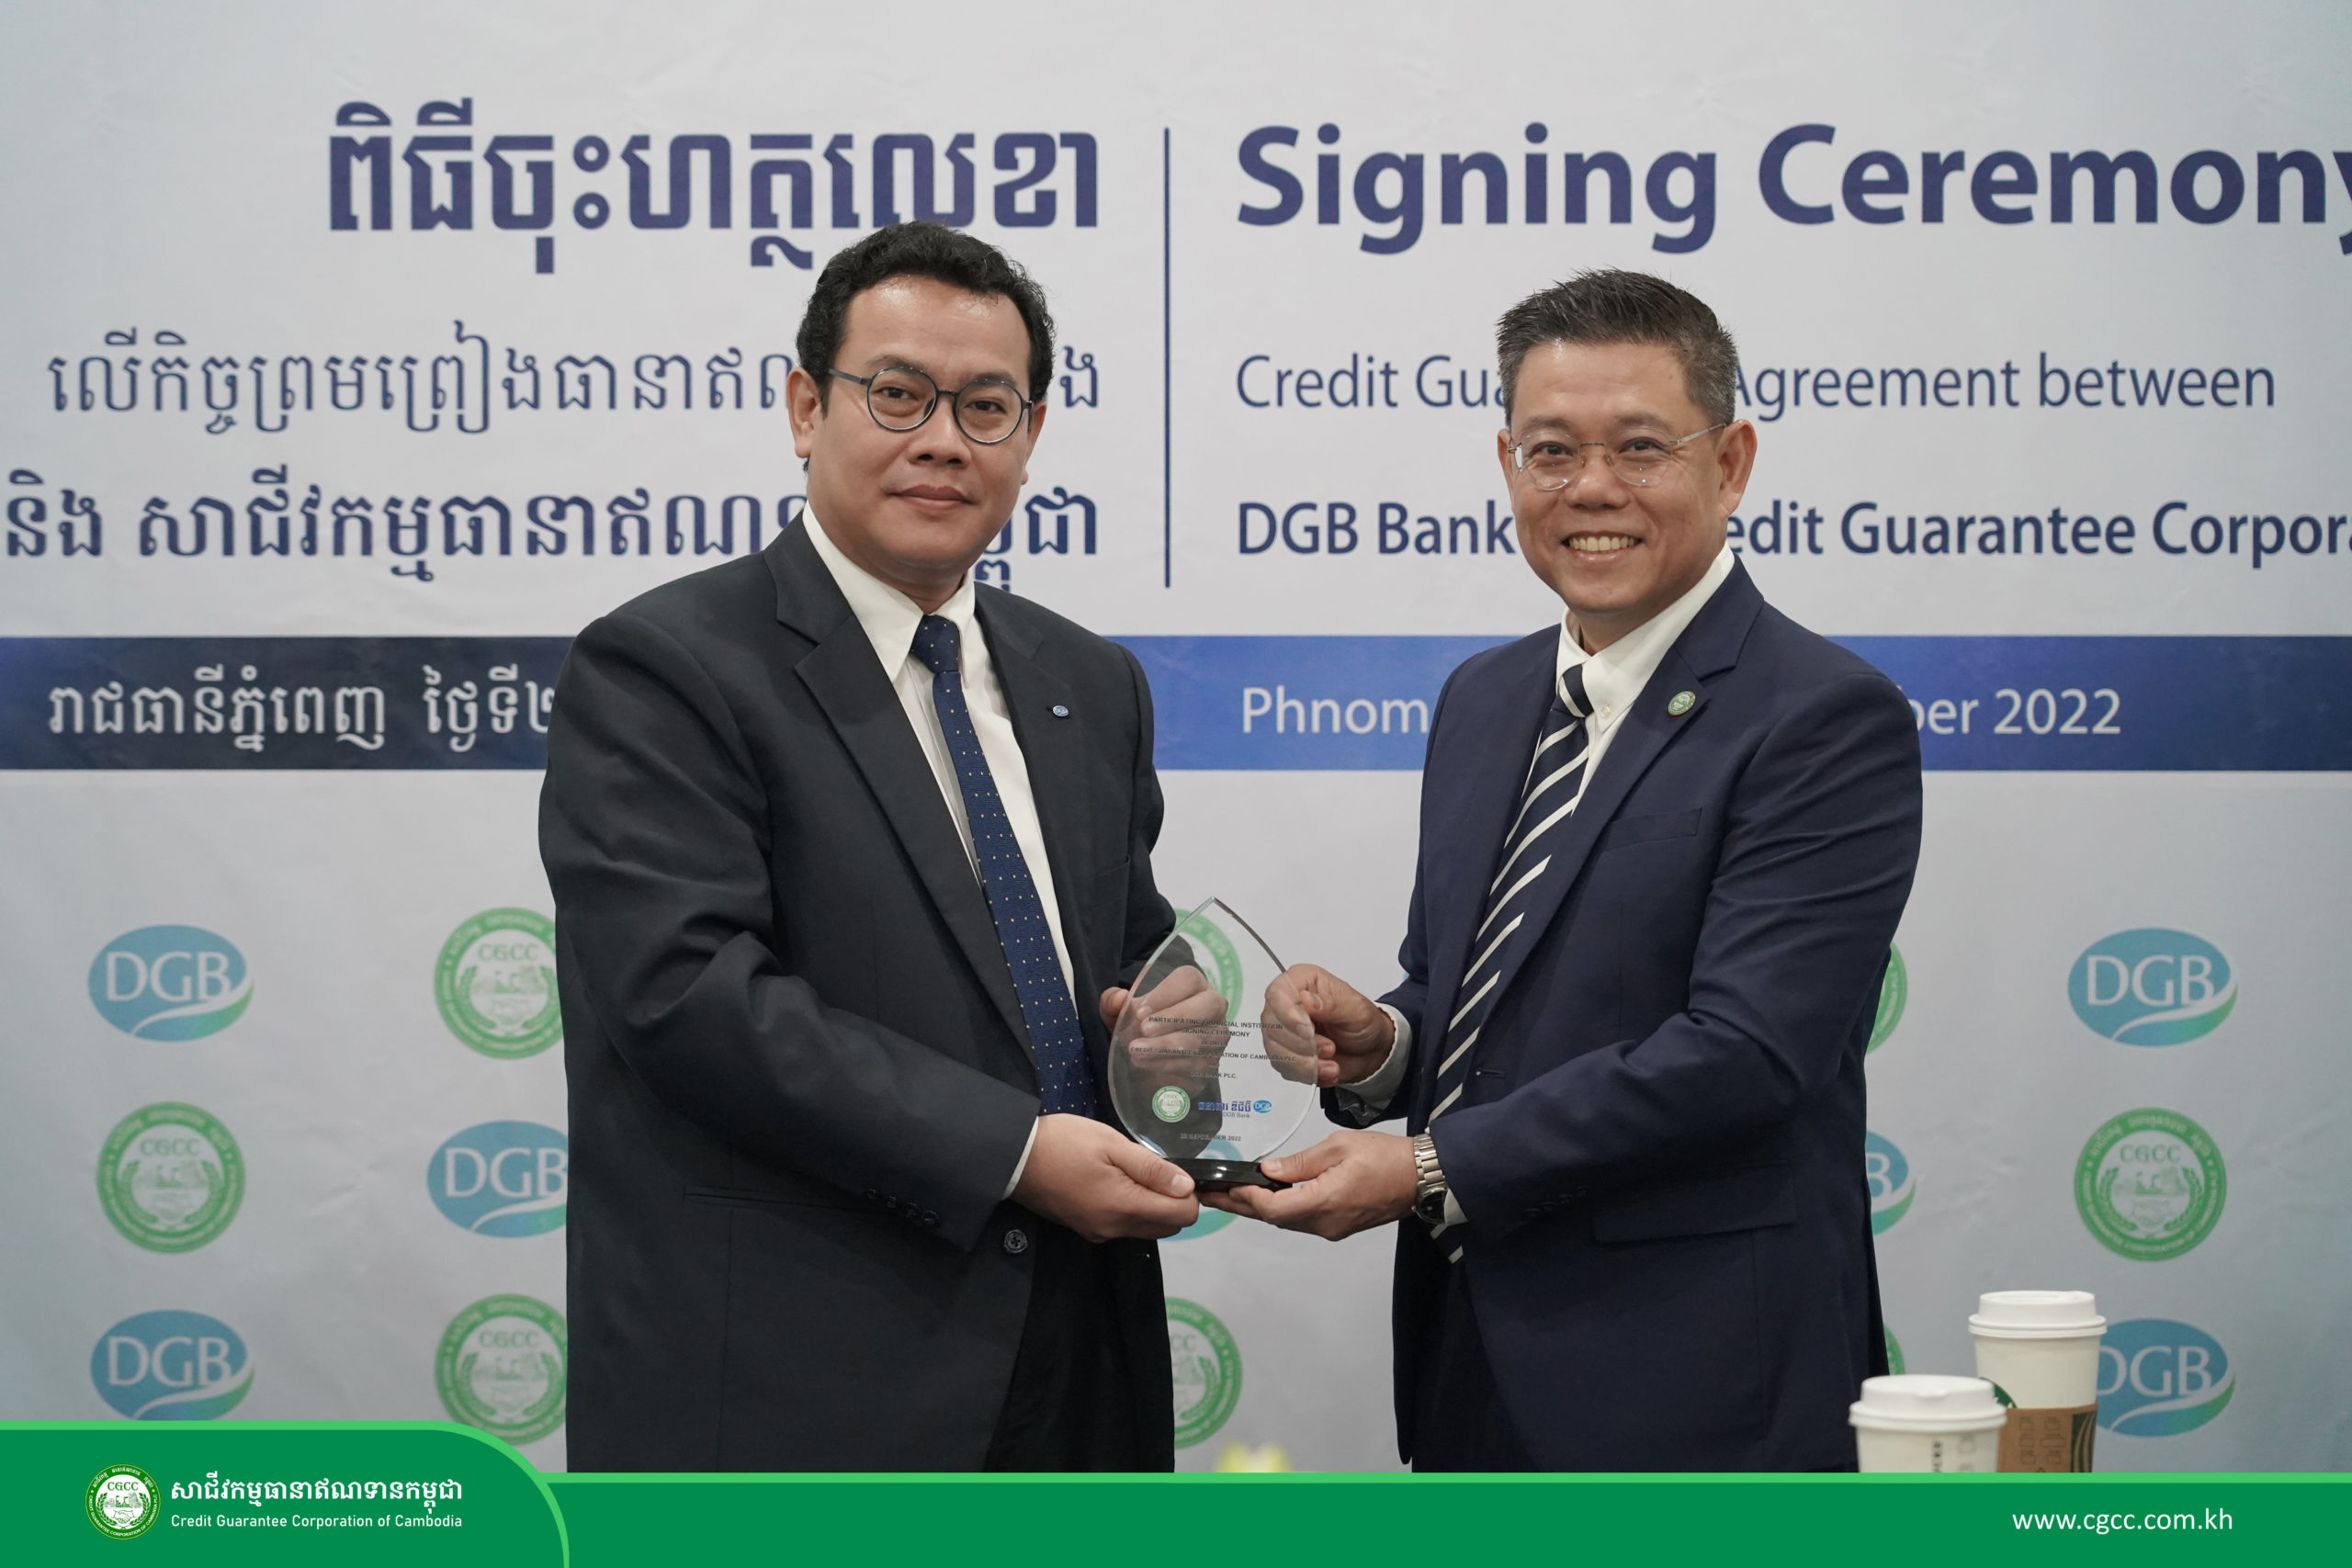 CGCC and DGB Bank signed the partnership of credit guarantee agreement to provide more support for business loans that lack of collateral